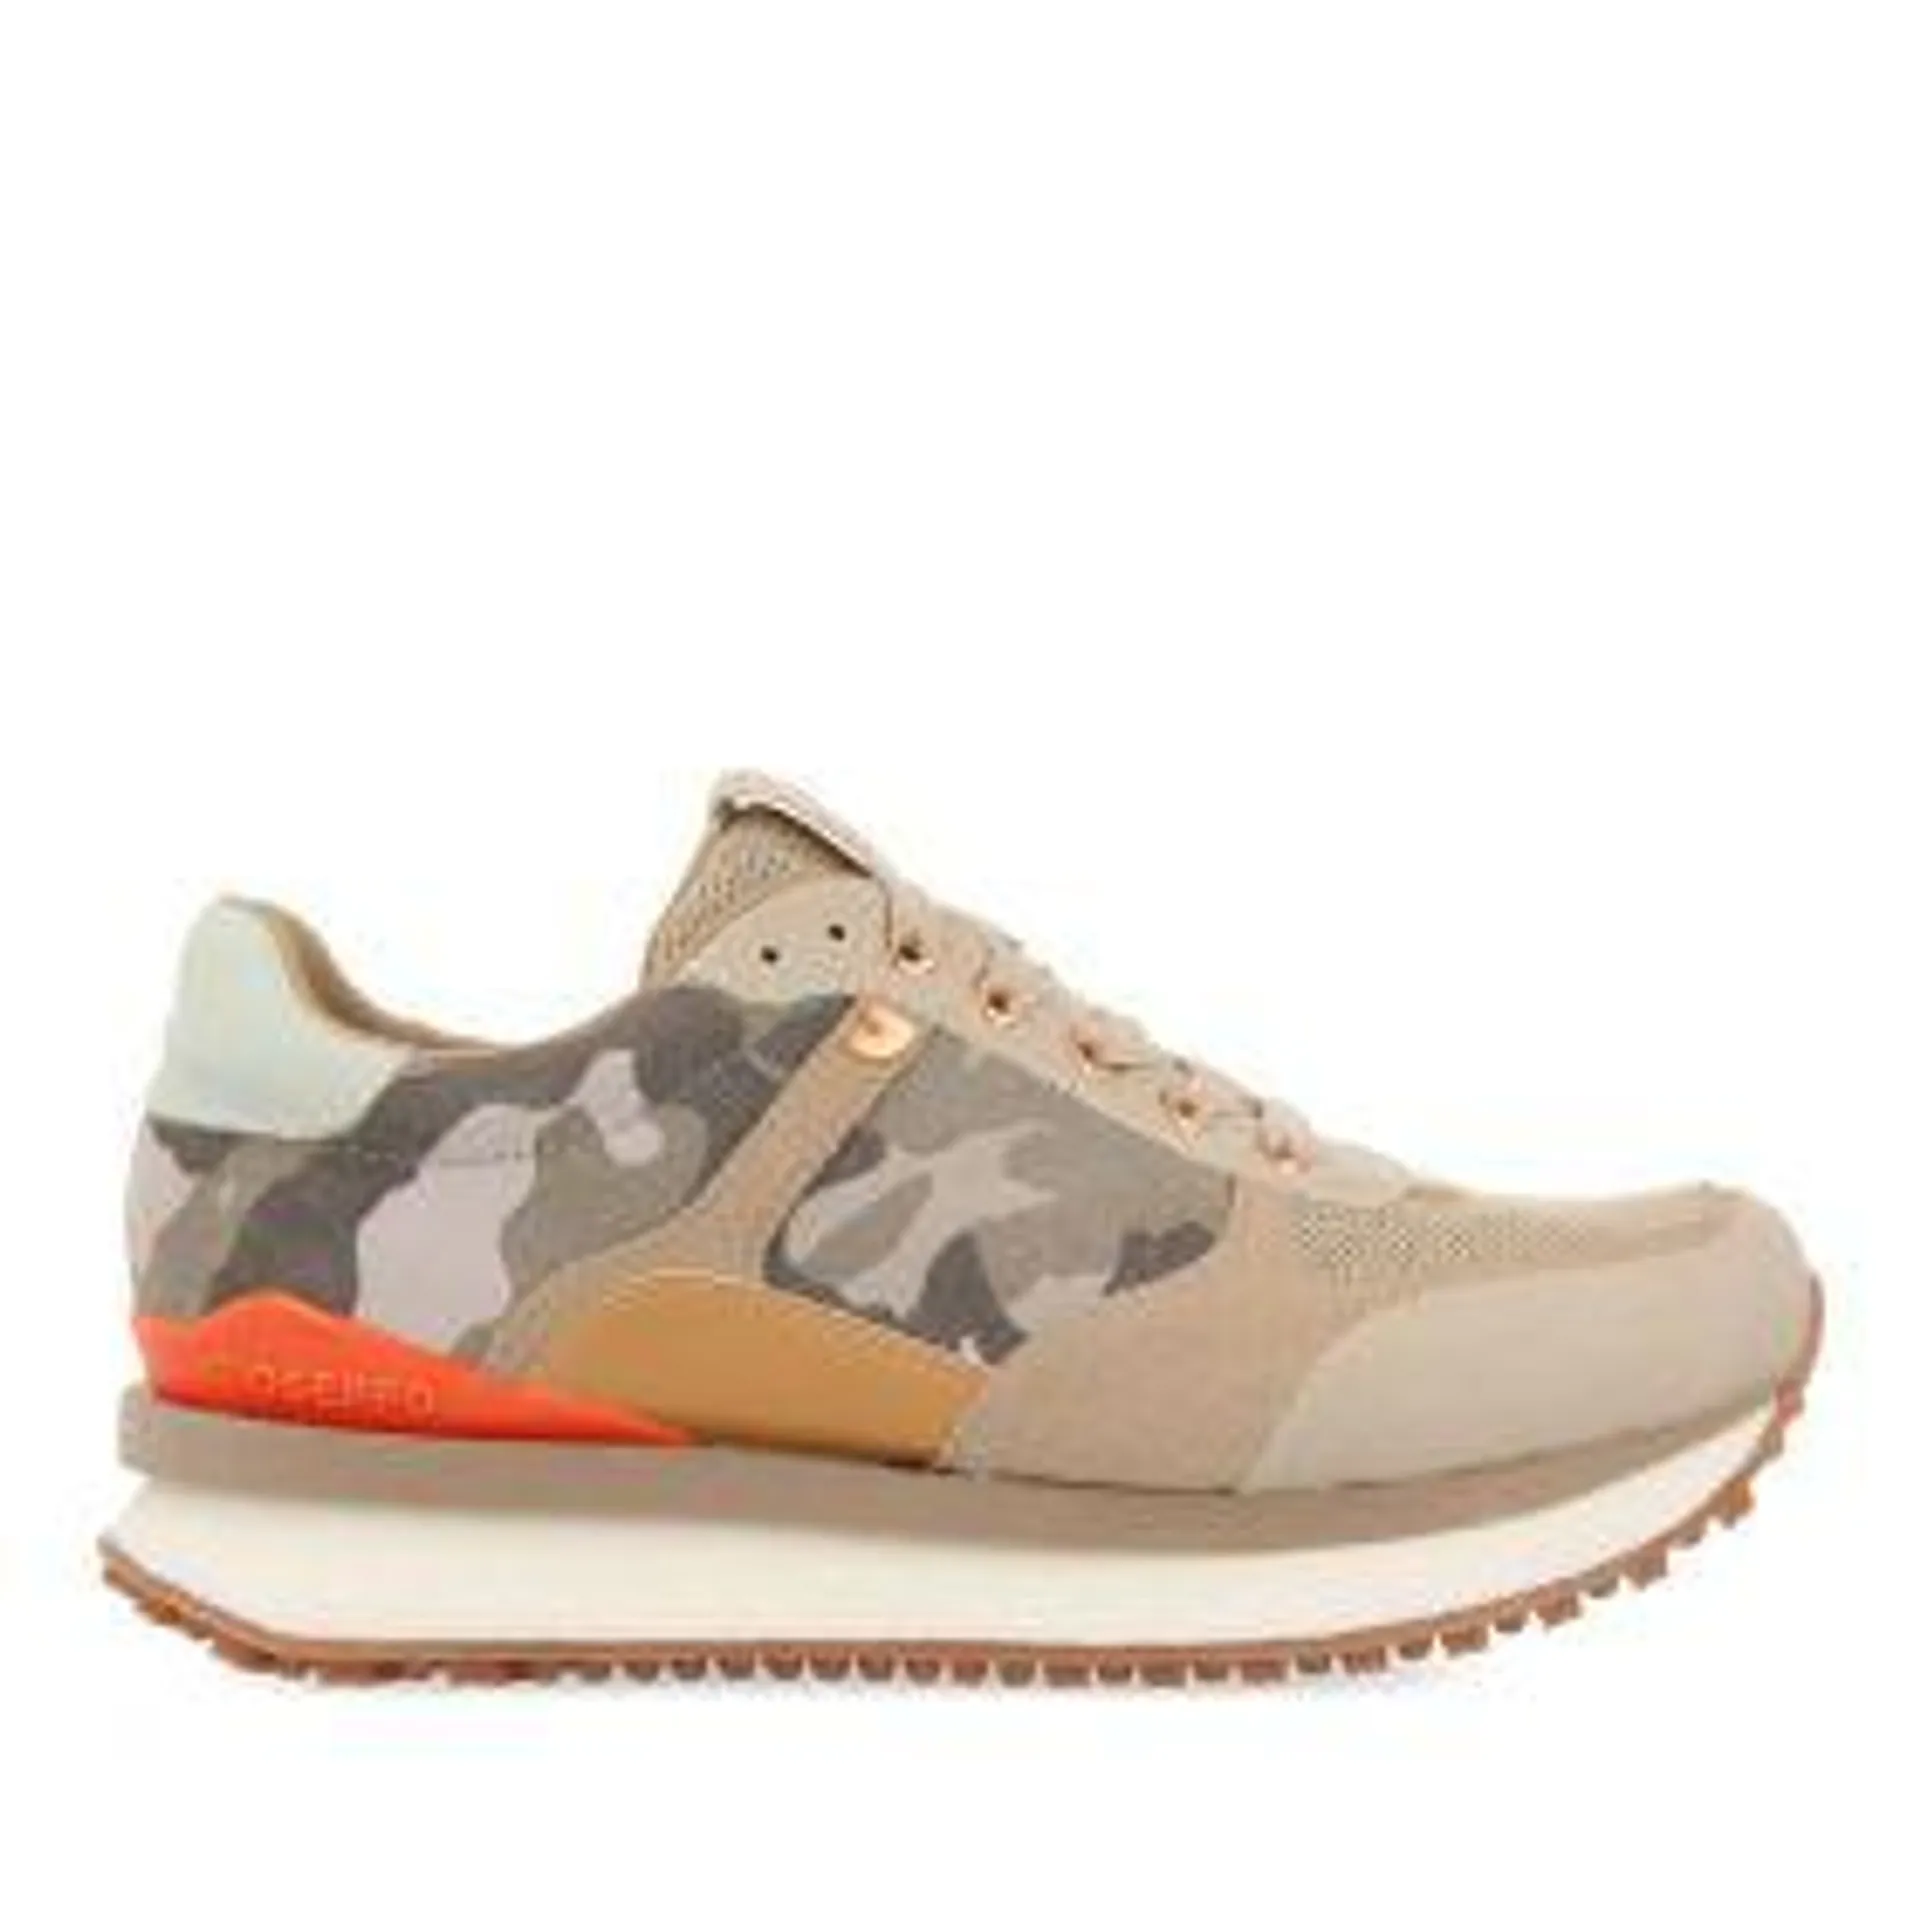 Boevange women's camouflage sneakers featuring orange, gold, beige and mint green